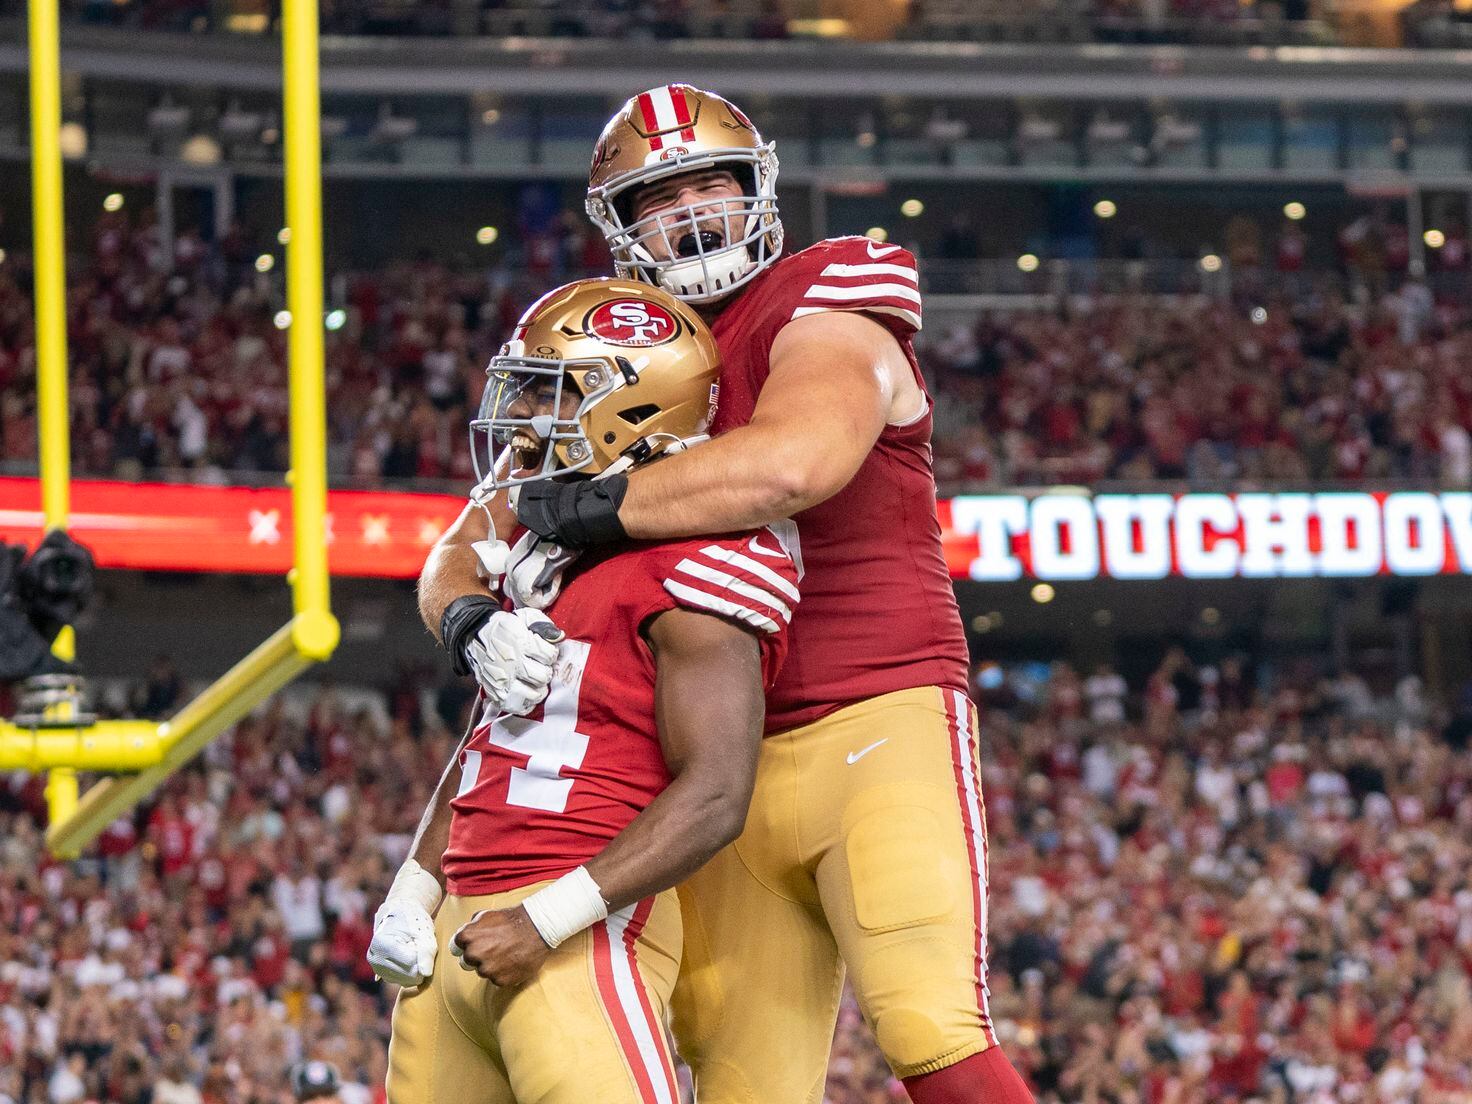 Cowboys-49ers rivalry set for record-tying 9th playoff game